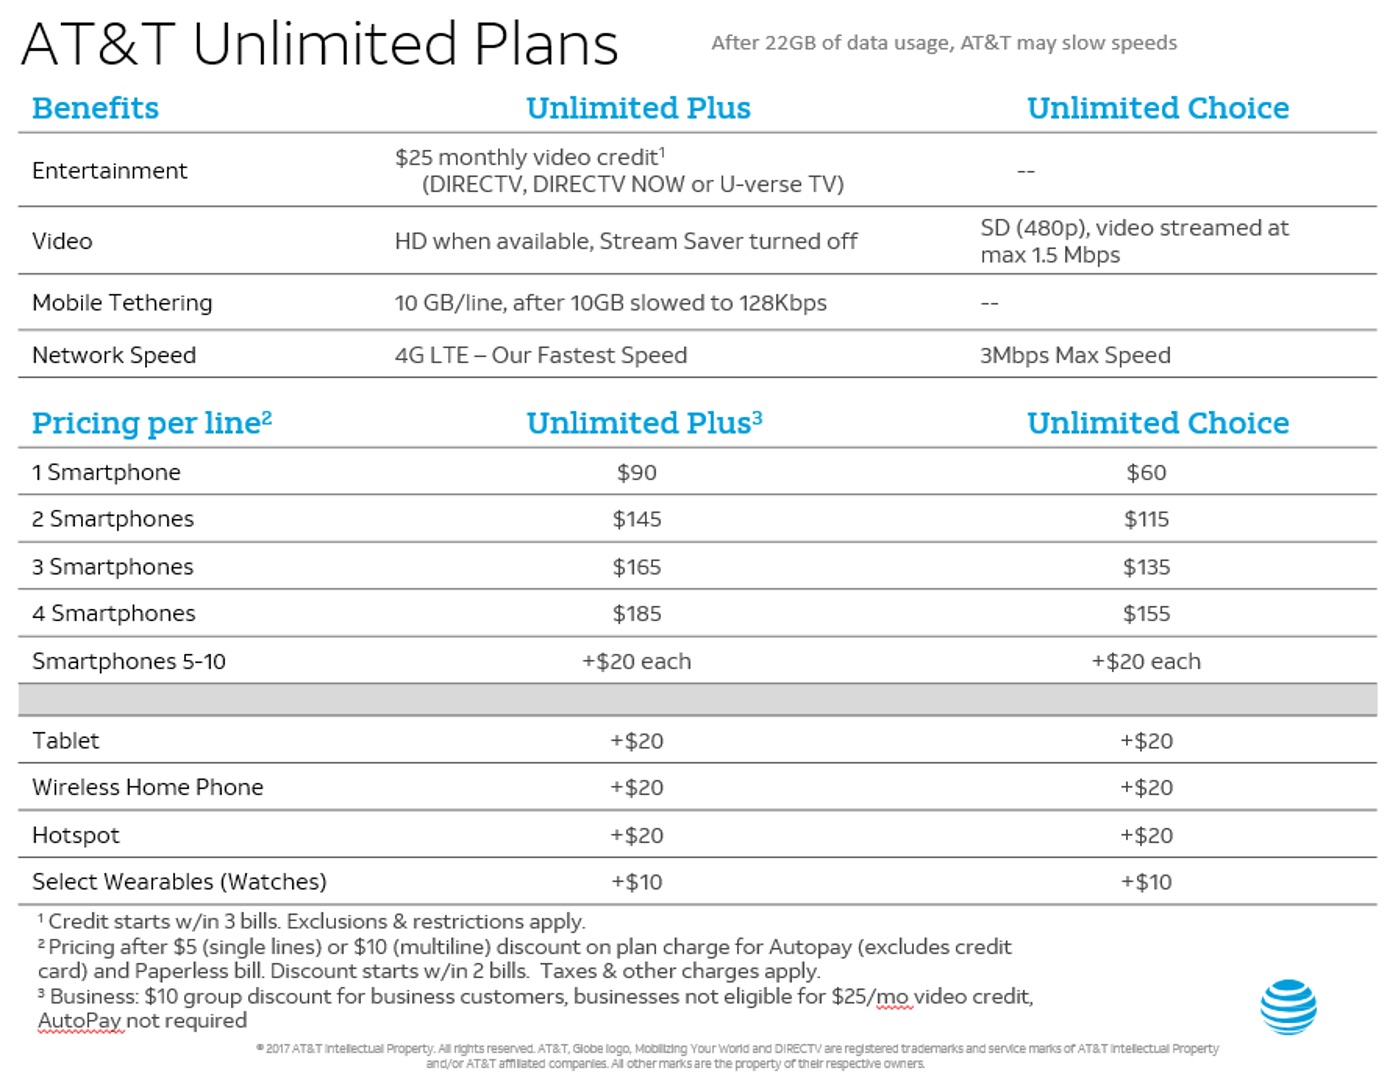 AT&T Unlimited Elite